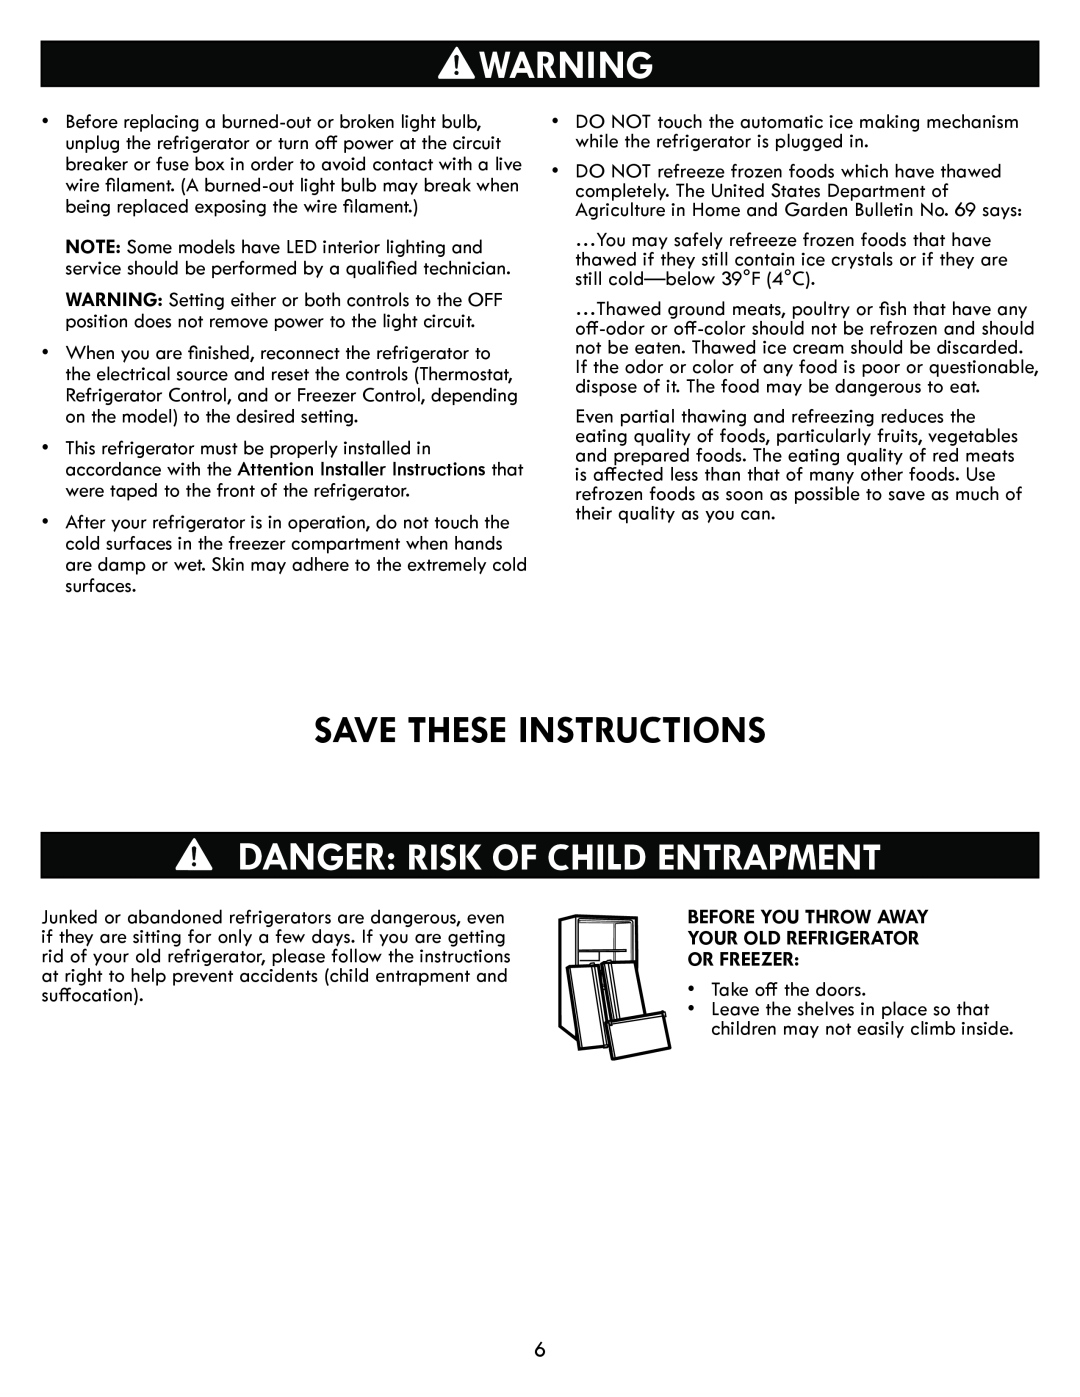 Kenmore kenmore Save These Instructions, Danger Risk Of Child Entrapment, Before You Throw Away Your Old Refrigerator 